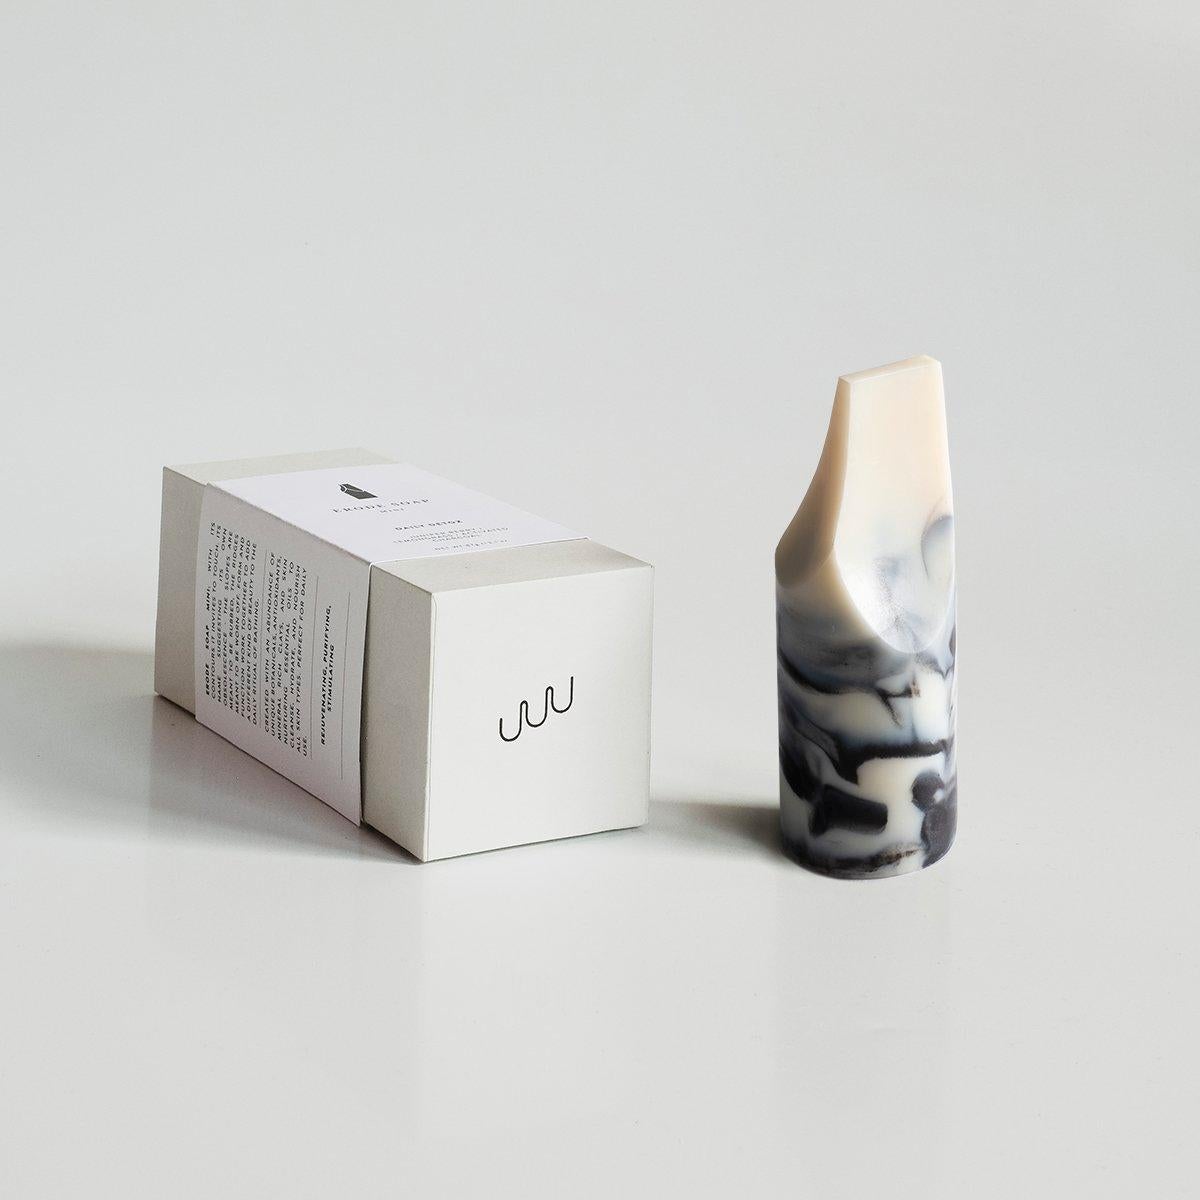 Luscious soap and unique shapes, form and function work together to add a different kind of beauty to the daily ritual of bathing. Created with an abundance of unique botanicals, antioxidants, mineral rich clays, and skin-nurturing essential oils to